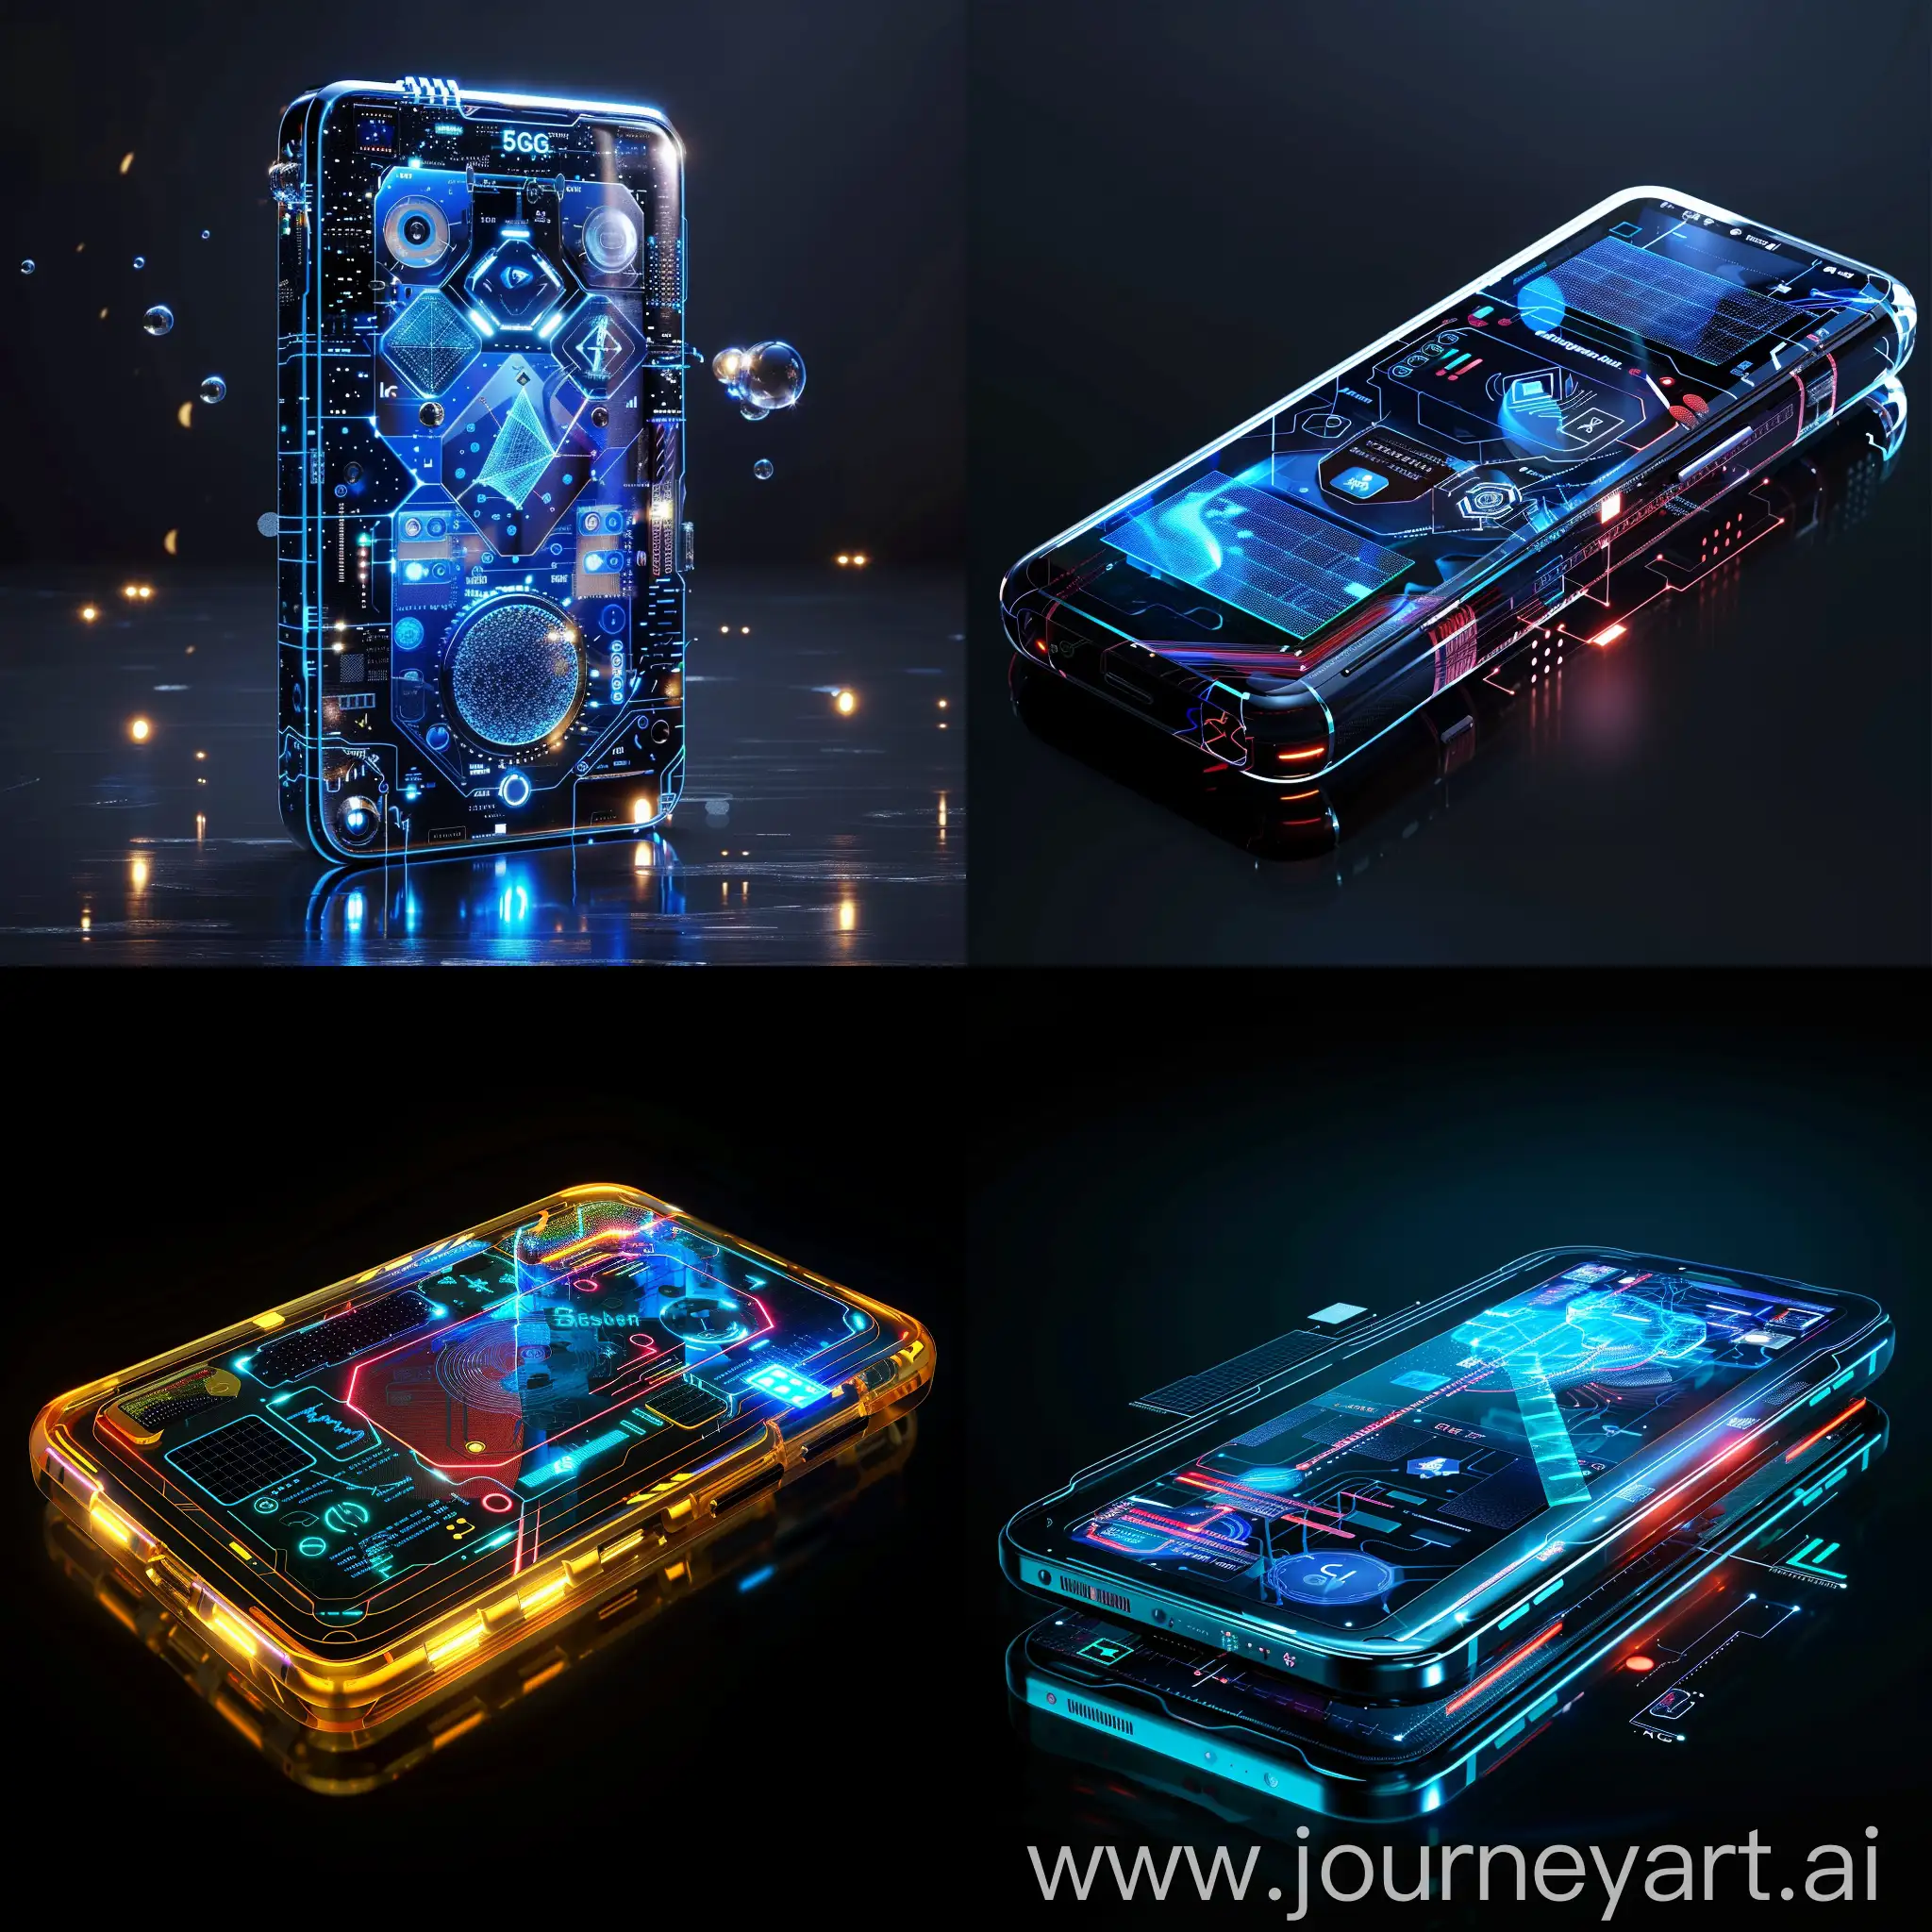 Futuristic-Smartphone-with-Quantum-Processors-and-Holographic-Display